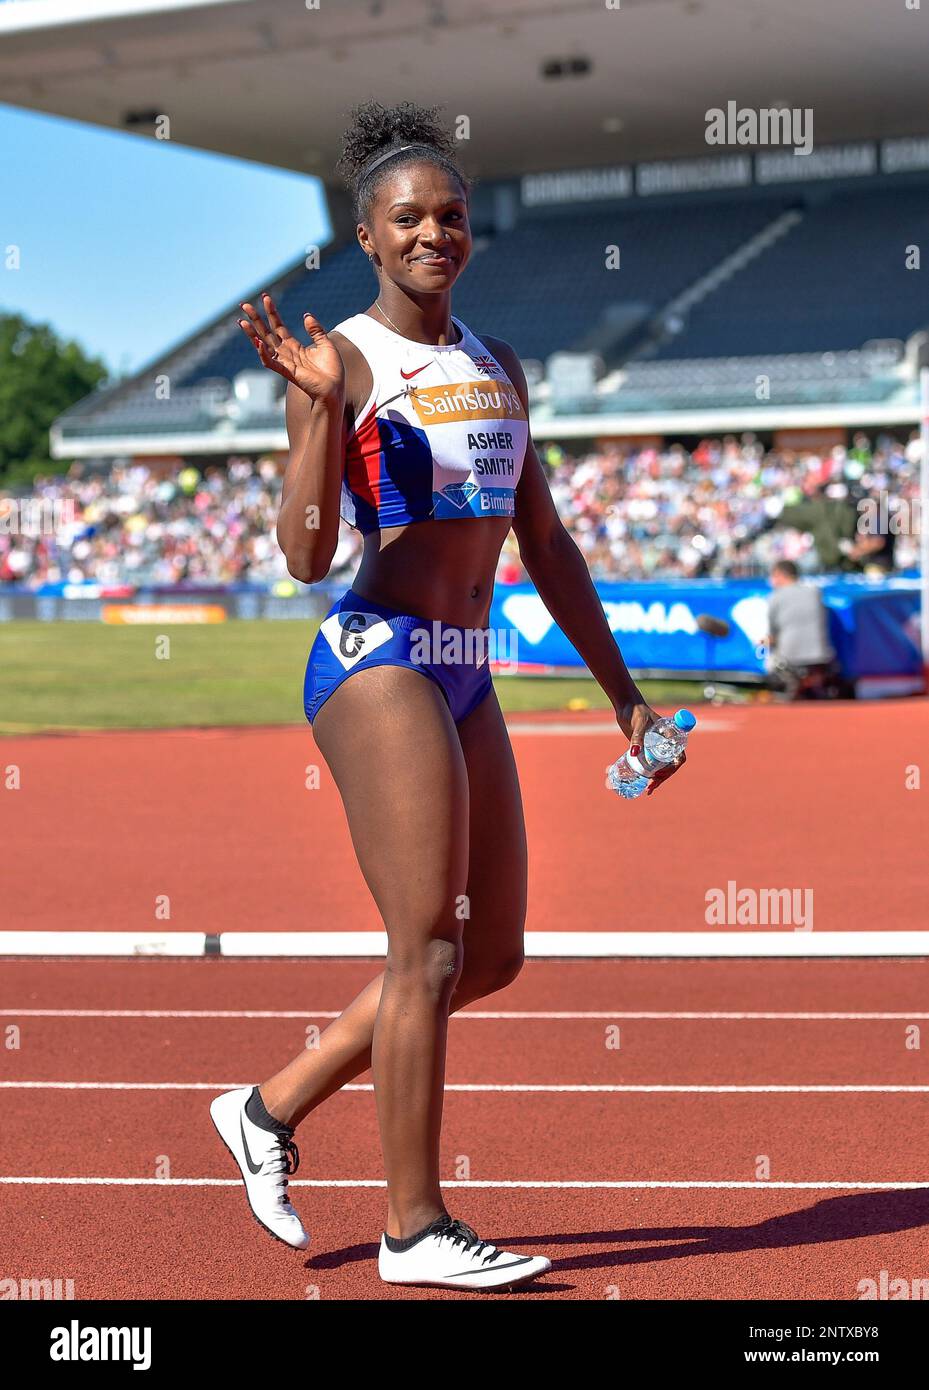 Dina Asher-Smith (GB) celebrates after running a Personal Best in